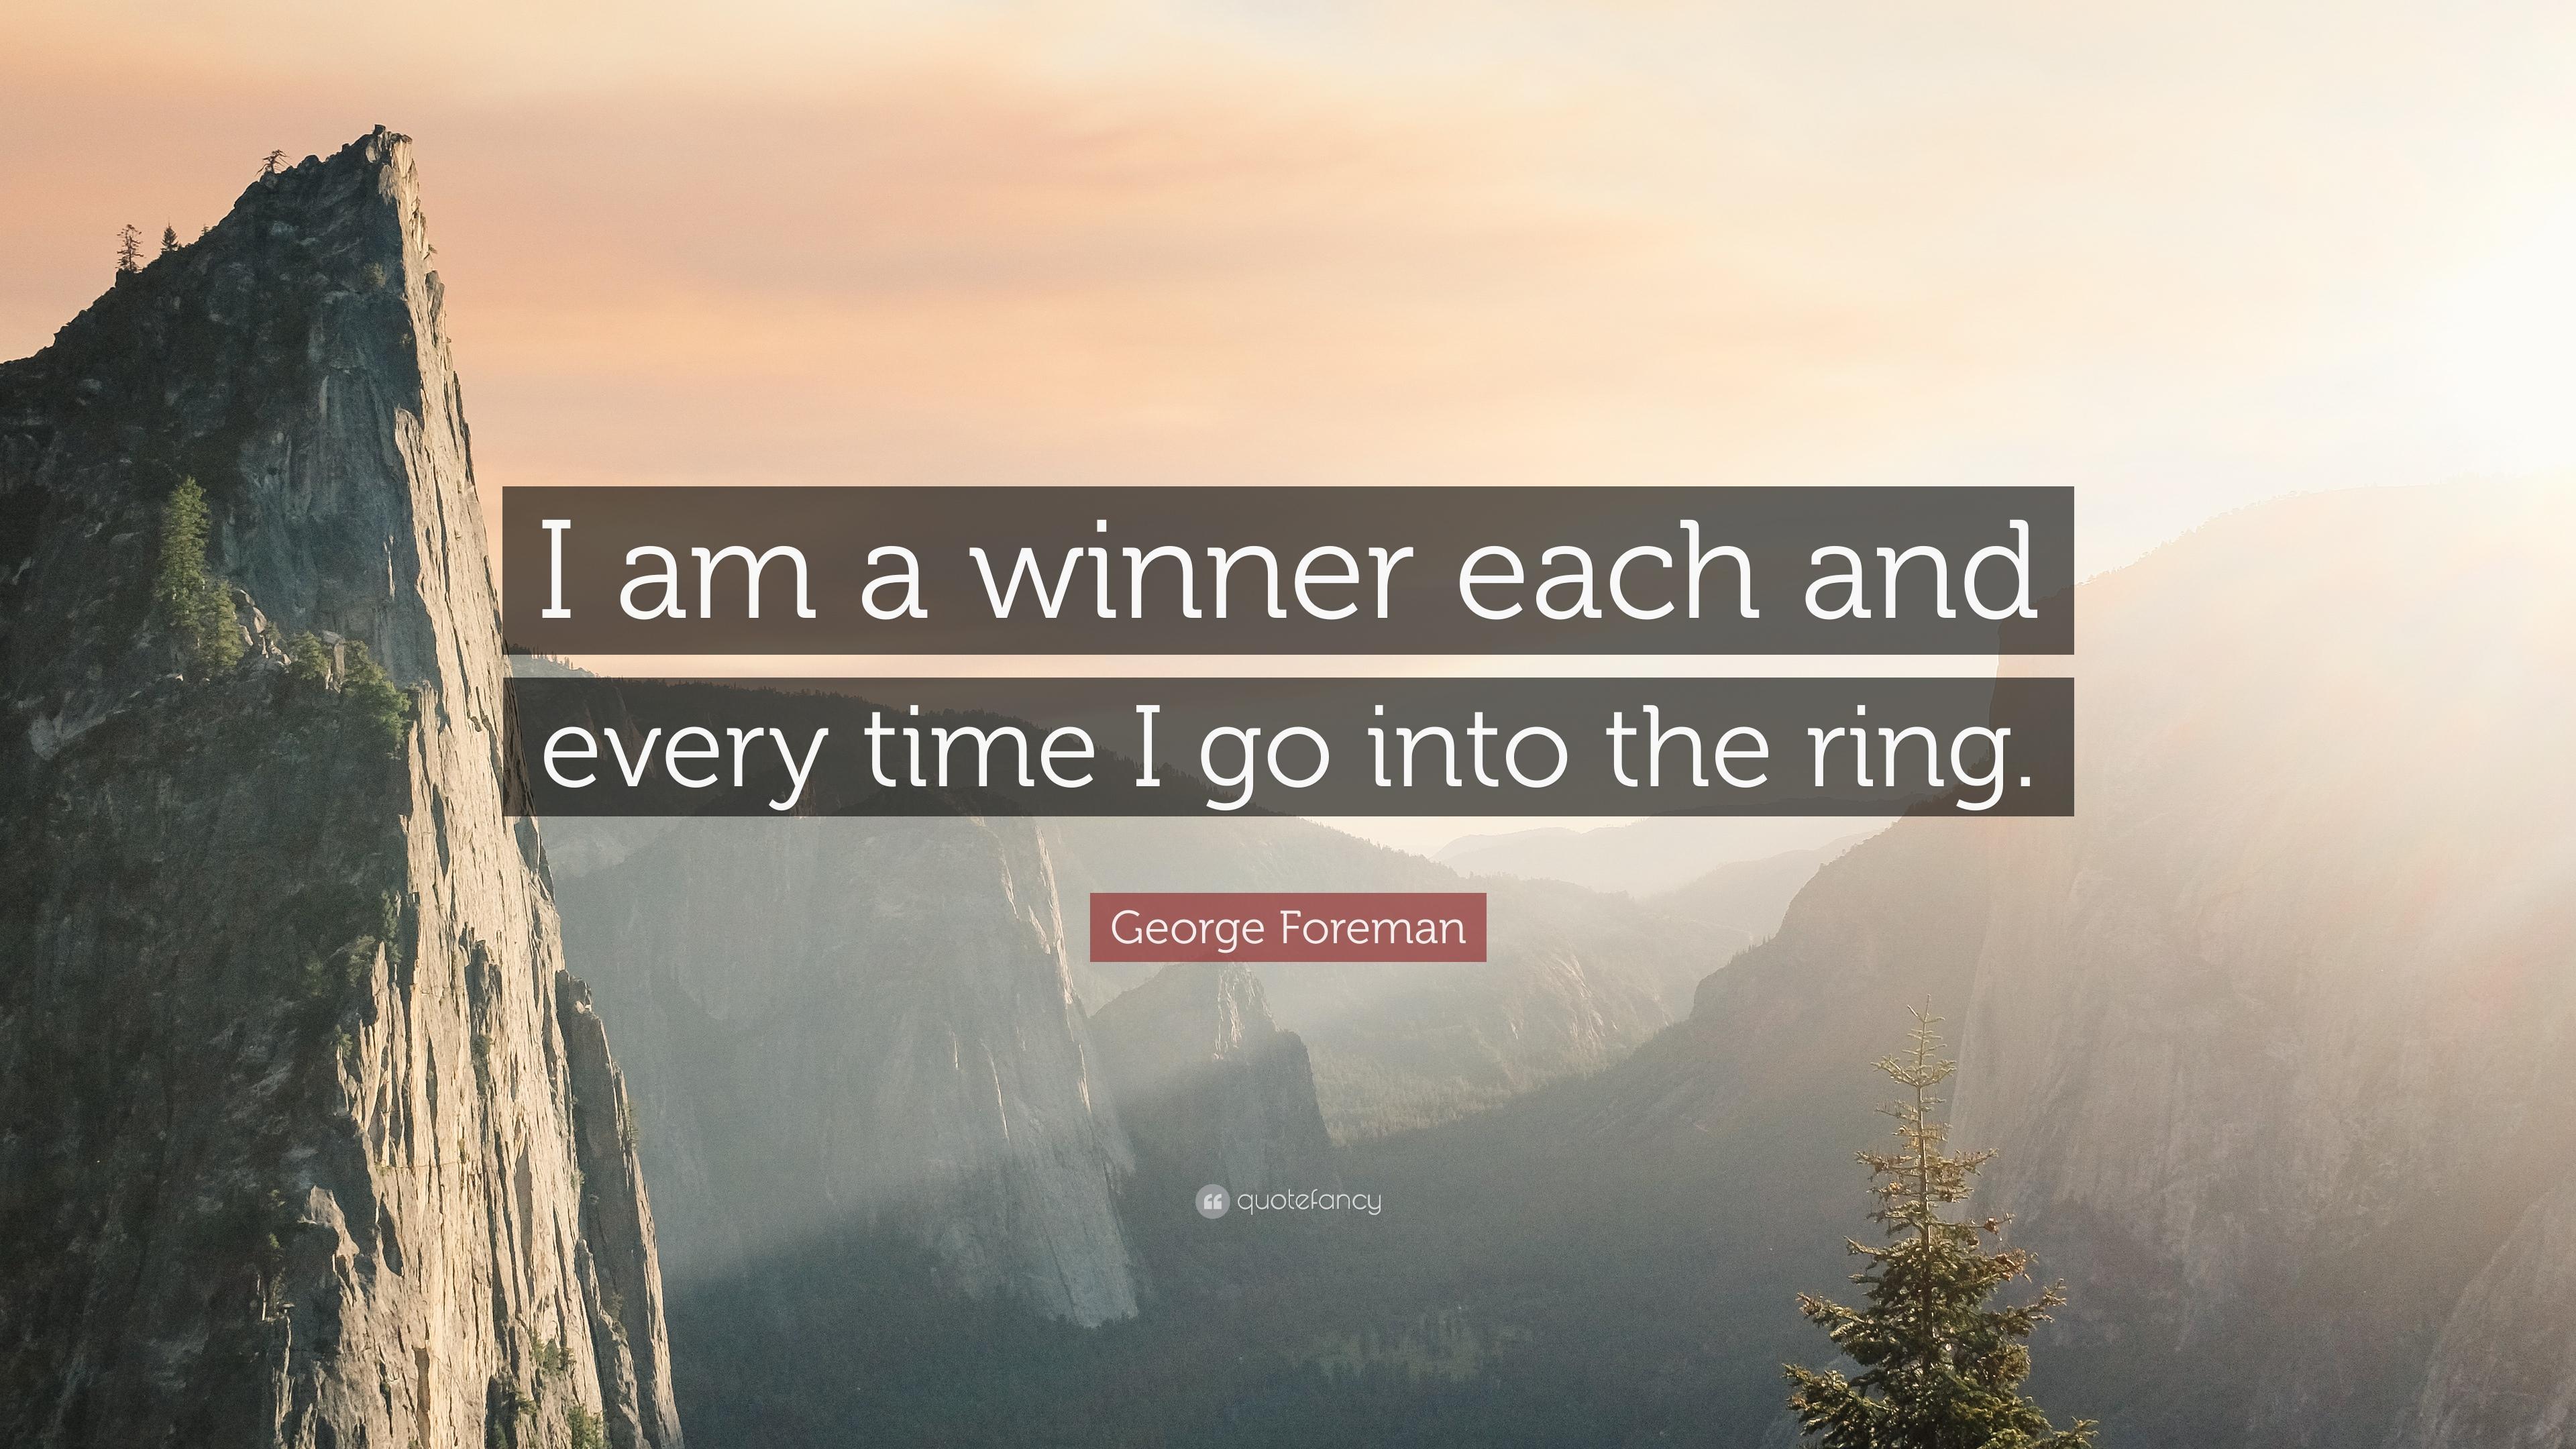 George Foreman Quotes (96 wallpaper)